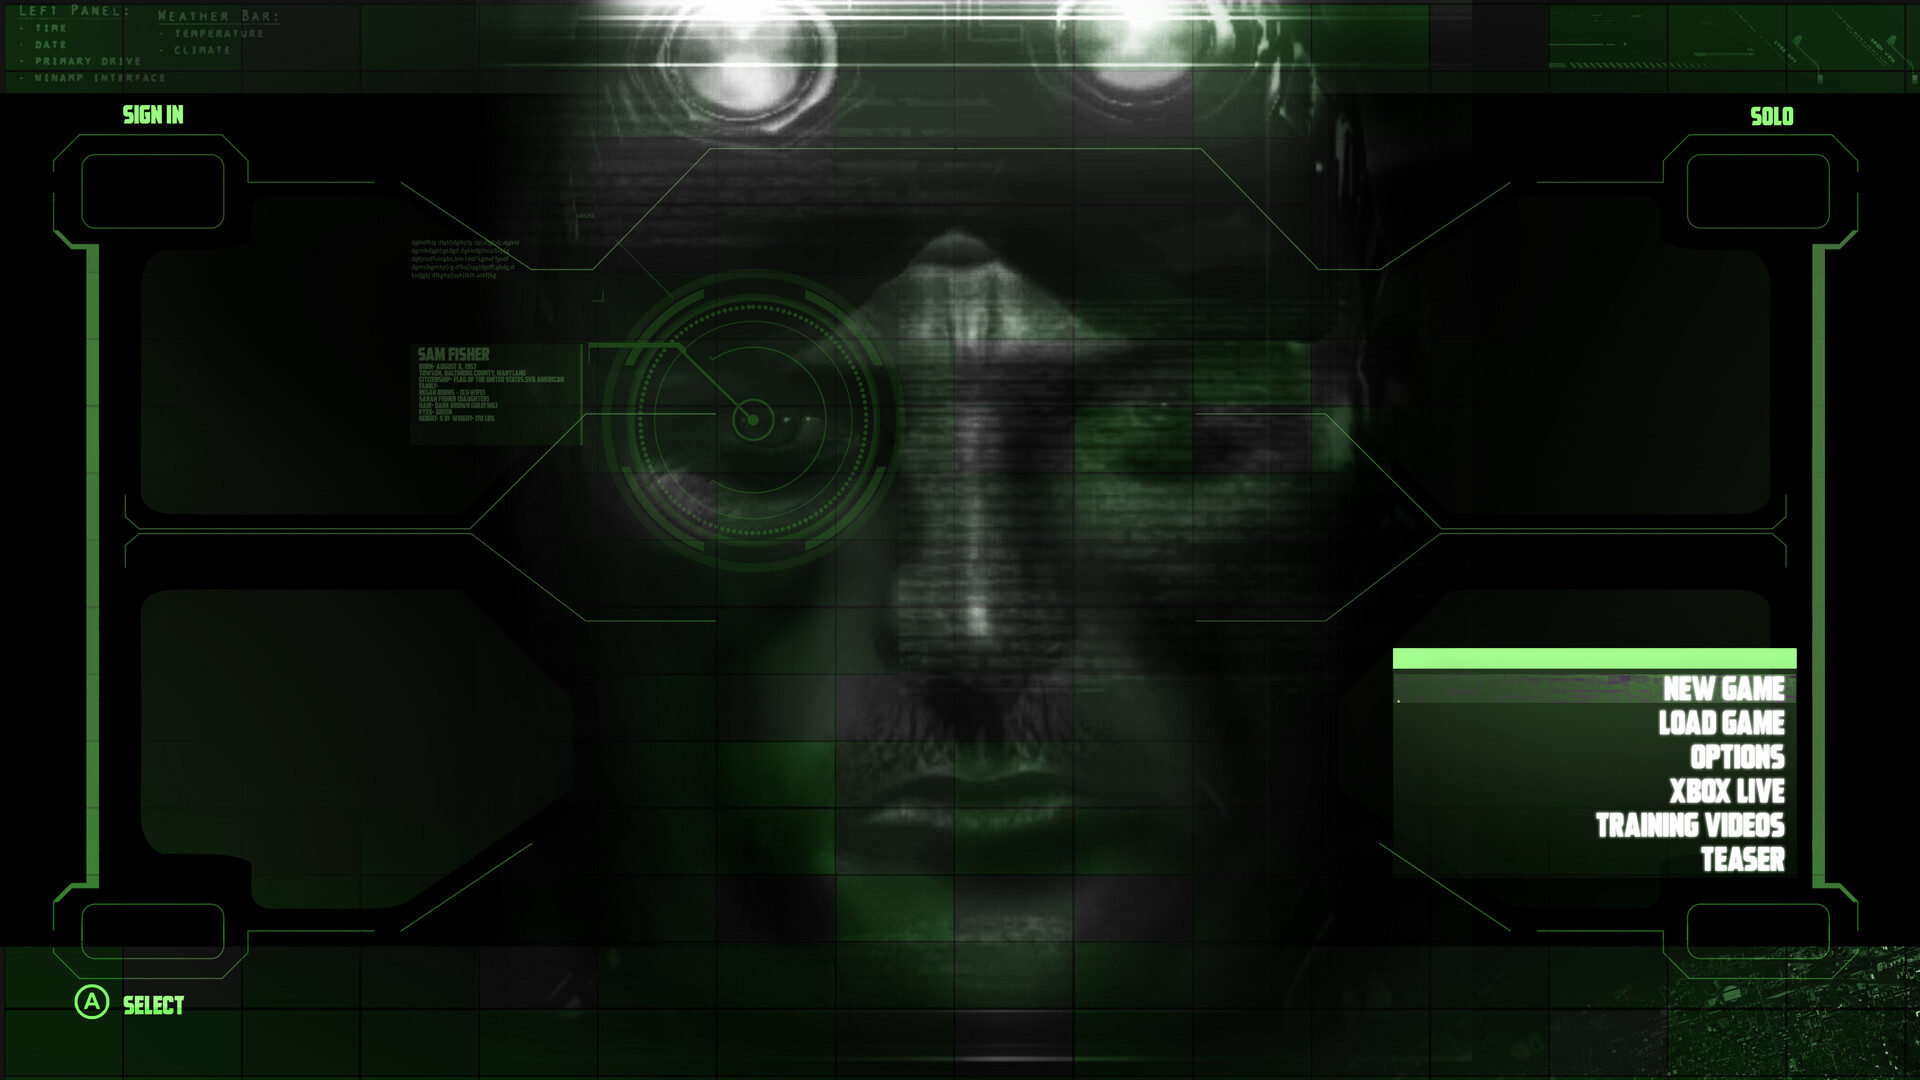 ArtStation - Reimagined UI for Splinter Cell Chaos Theory